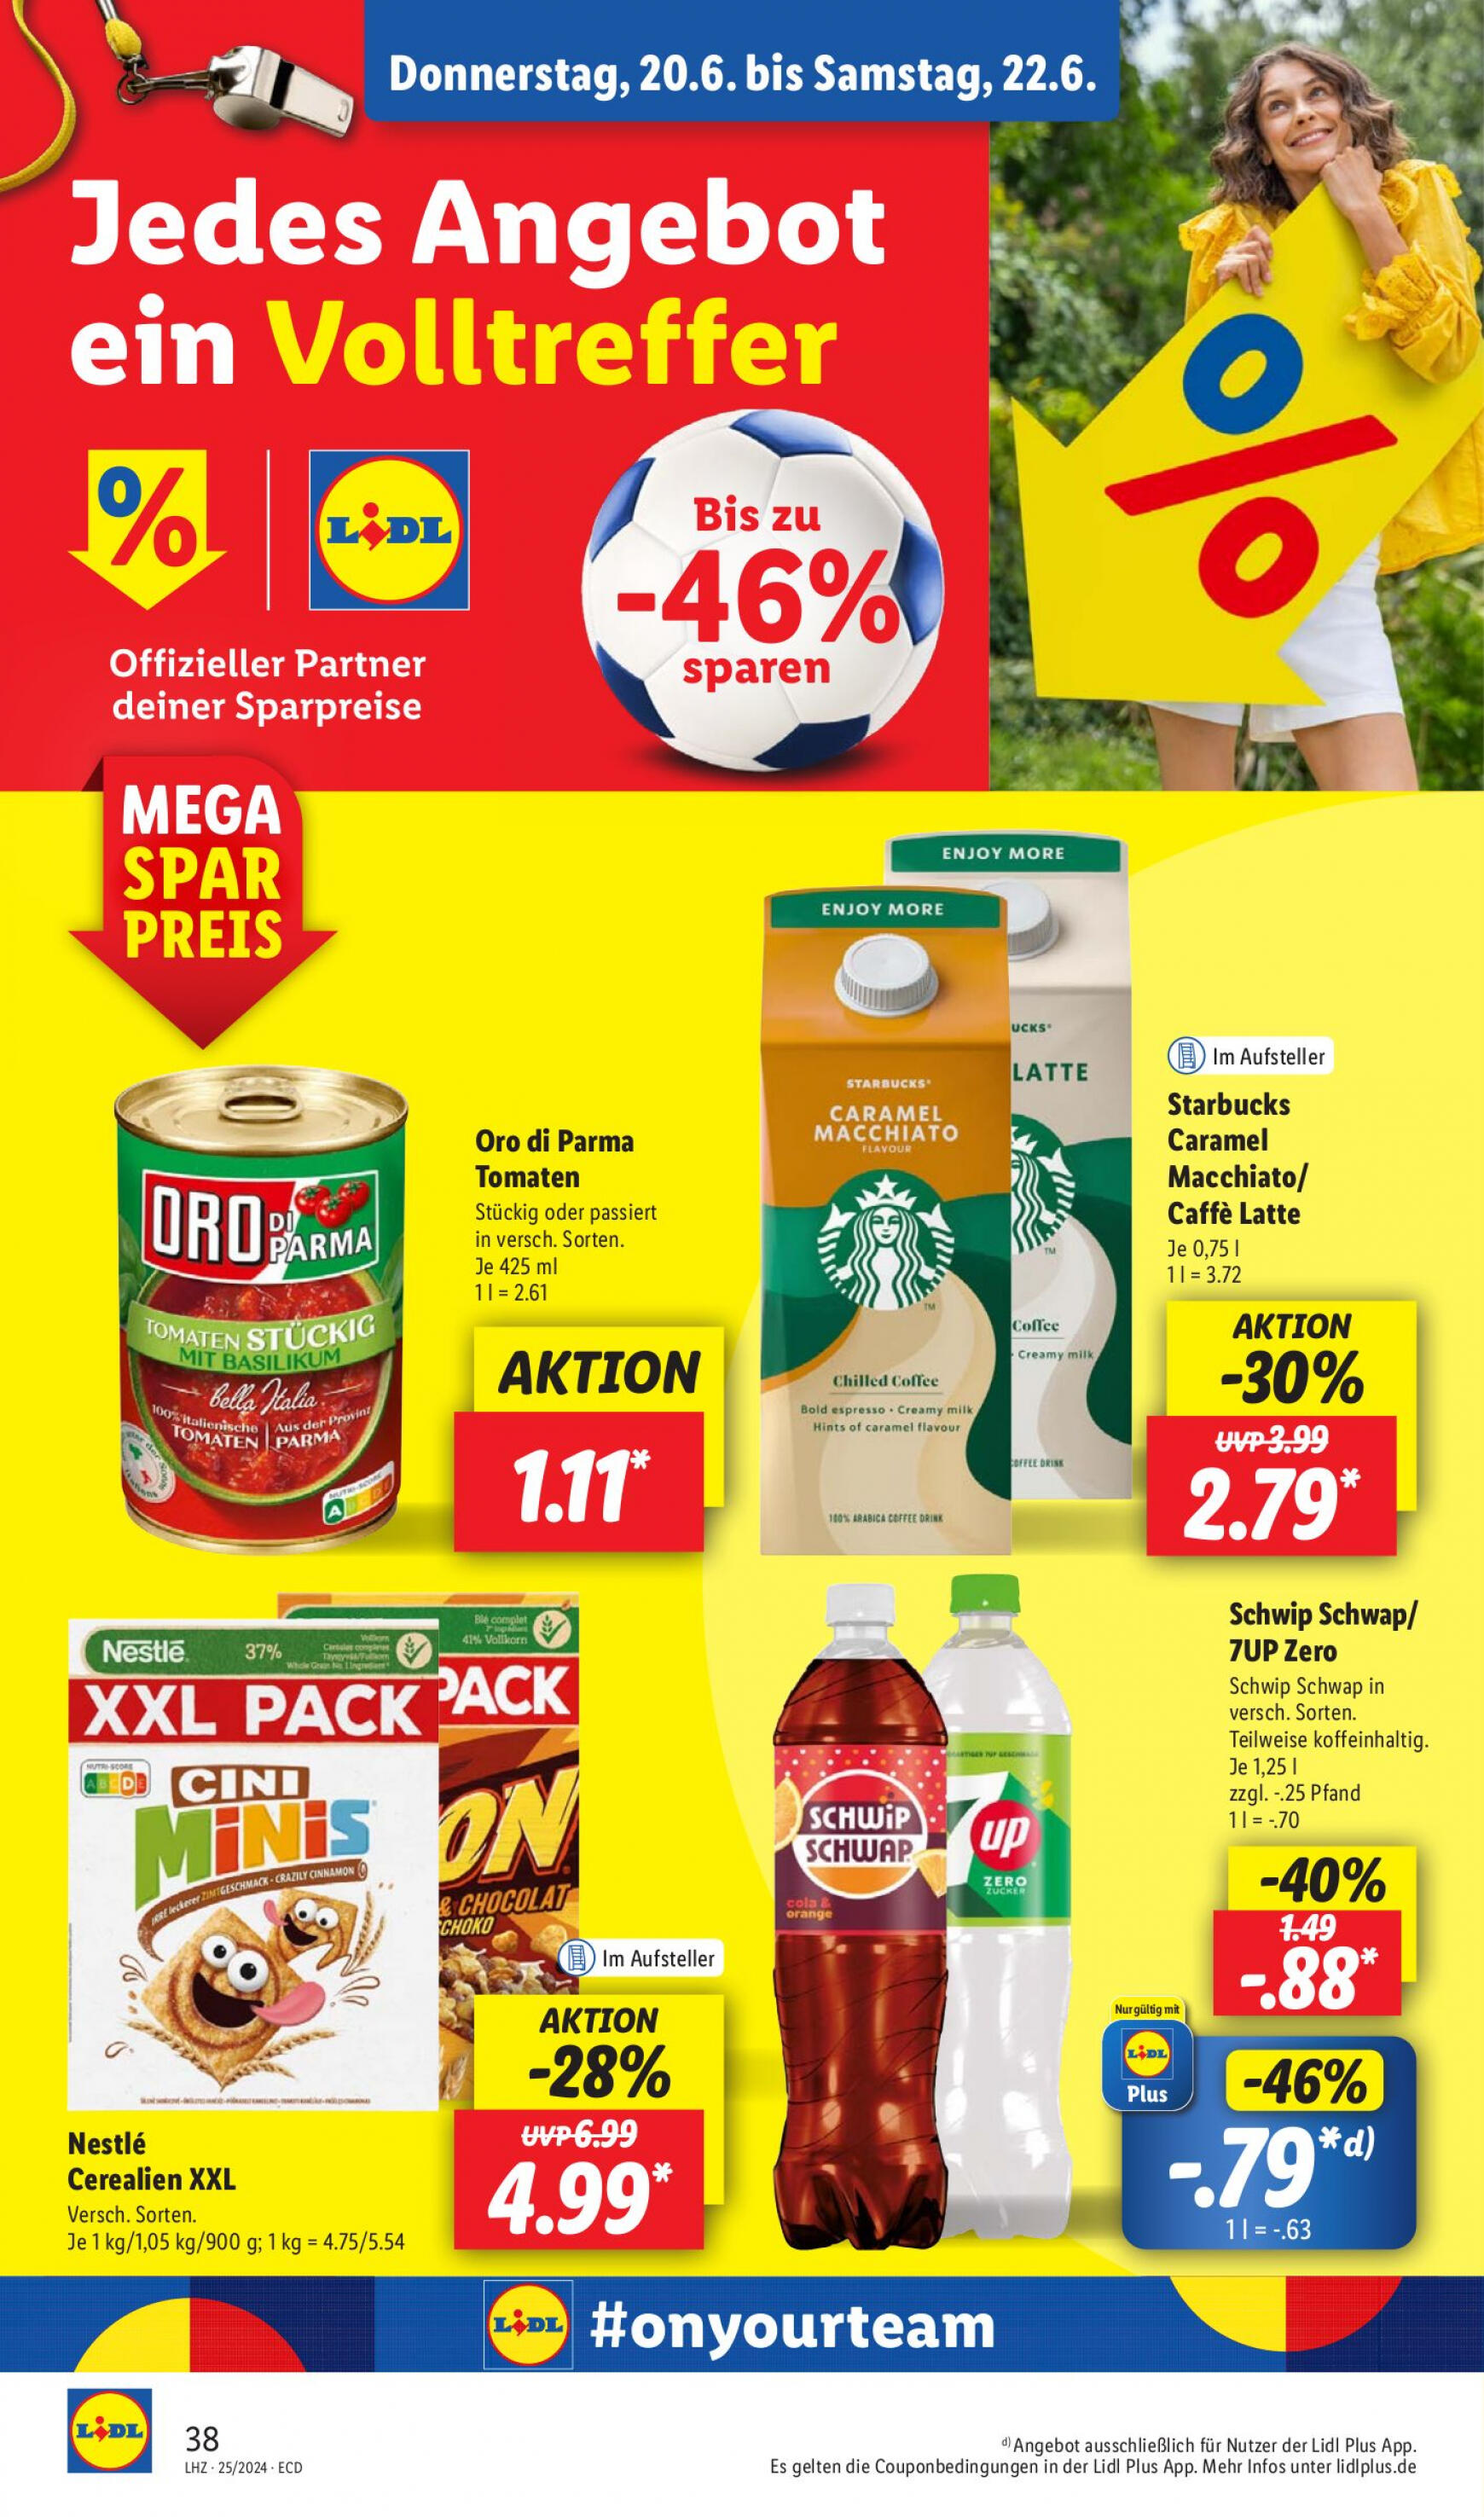 lidl - Flyer Lidl aktuell 17.06. - 22.06. - page: 50